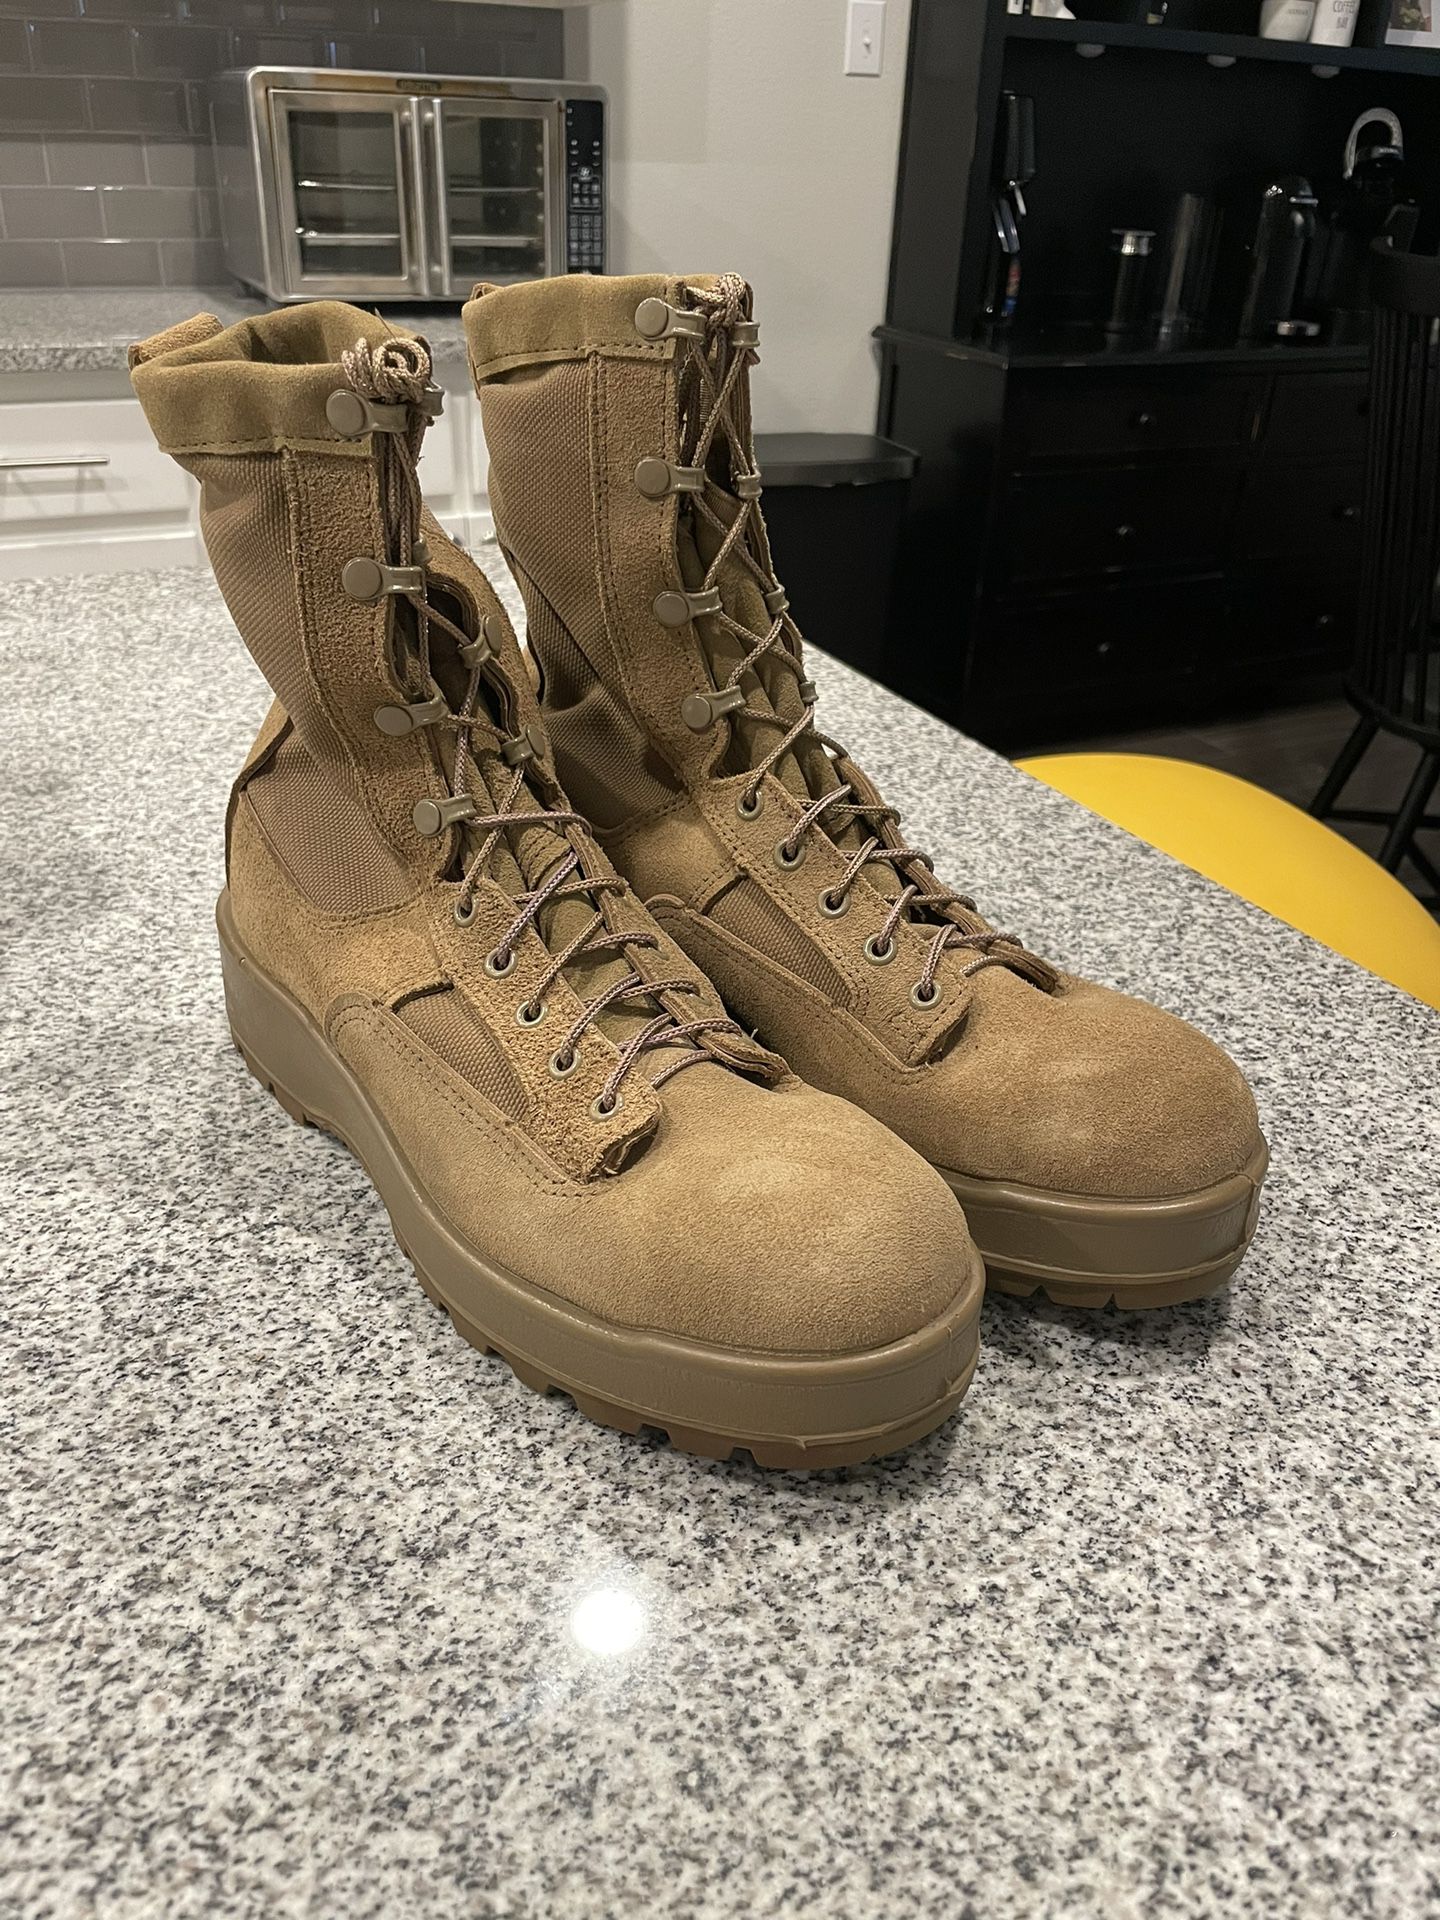 NEW Altama Military Combat Boots - Waterproof, Size 8.5M